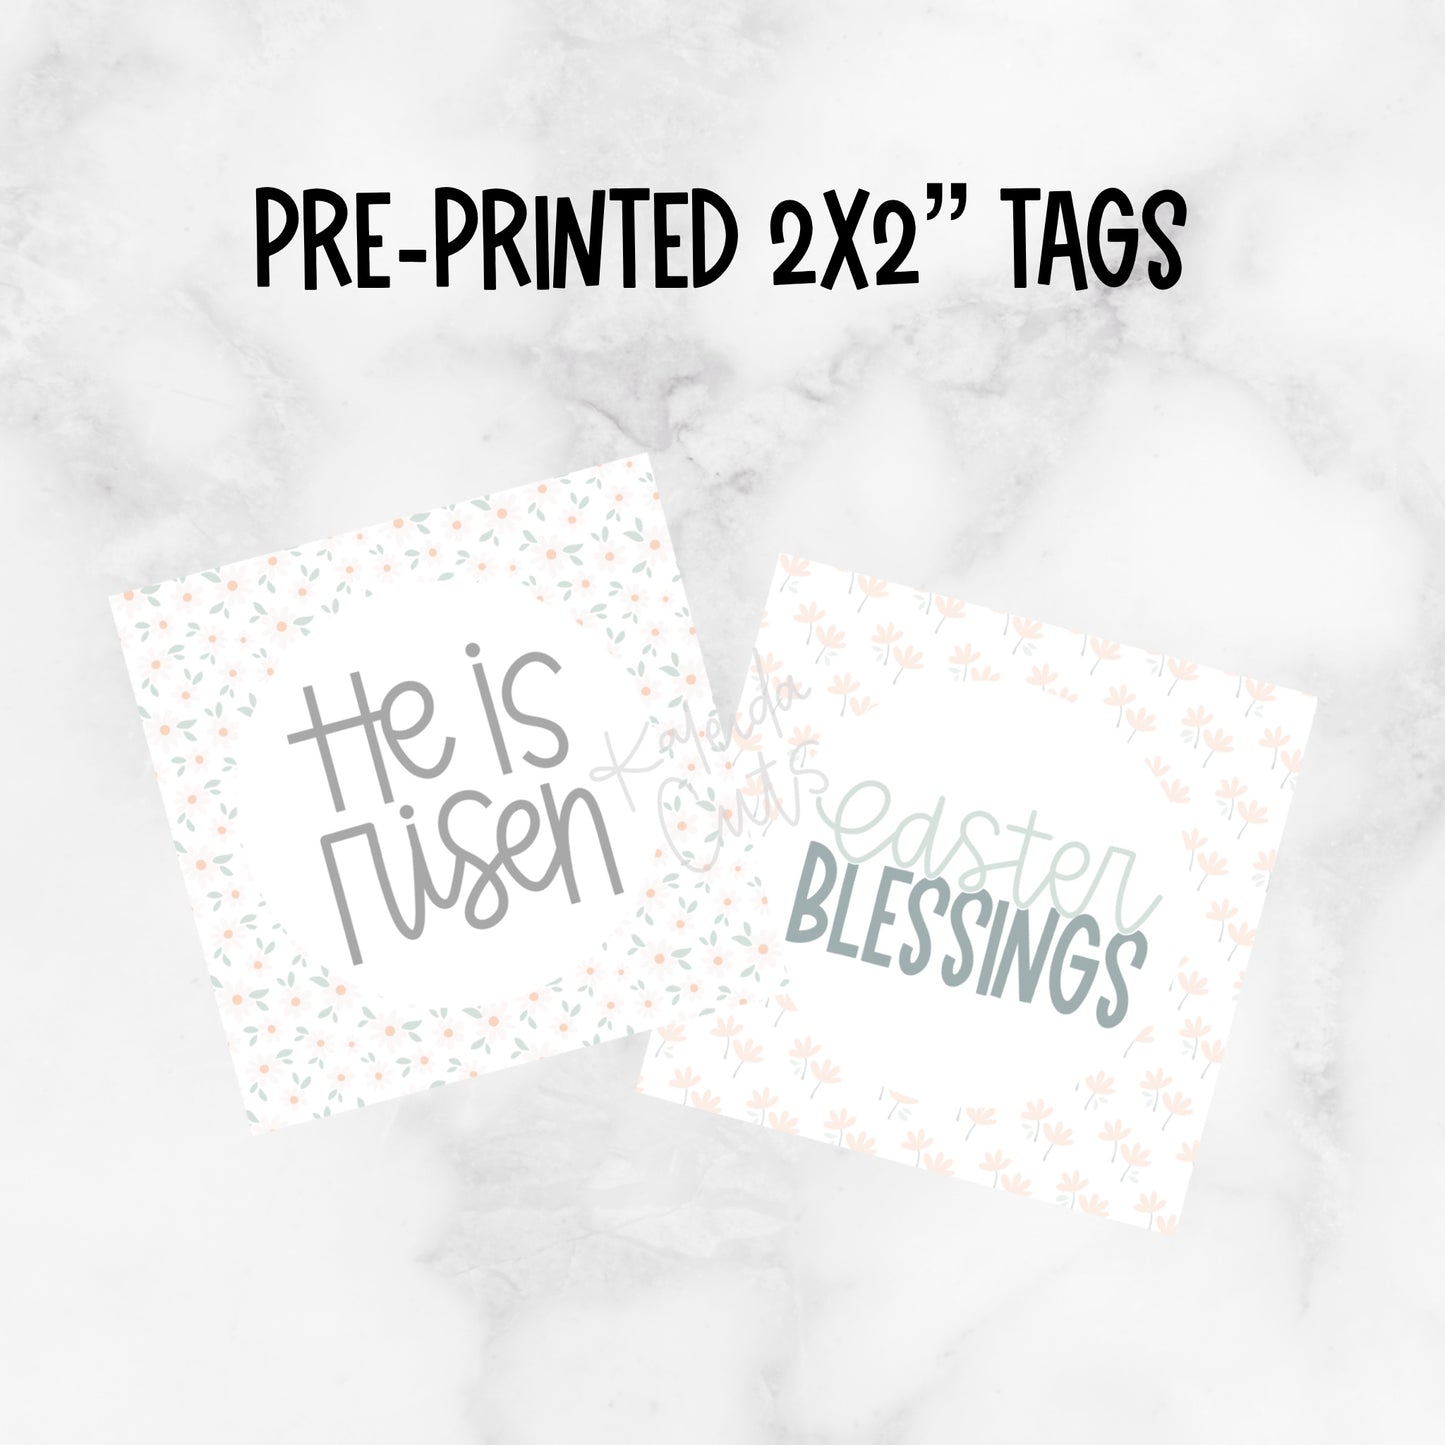 He is Risen / Easter Blessings 2” x 2” Printed Tags: Set of 25